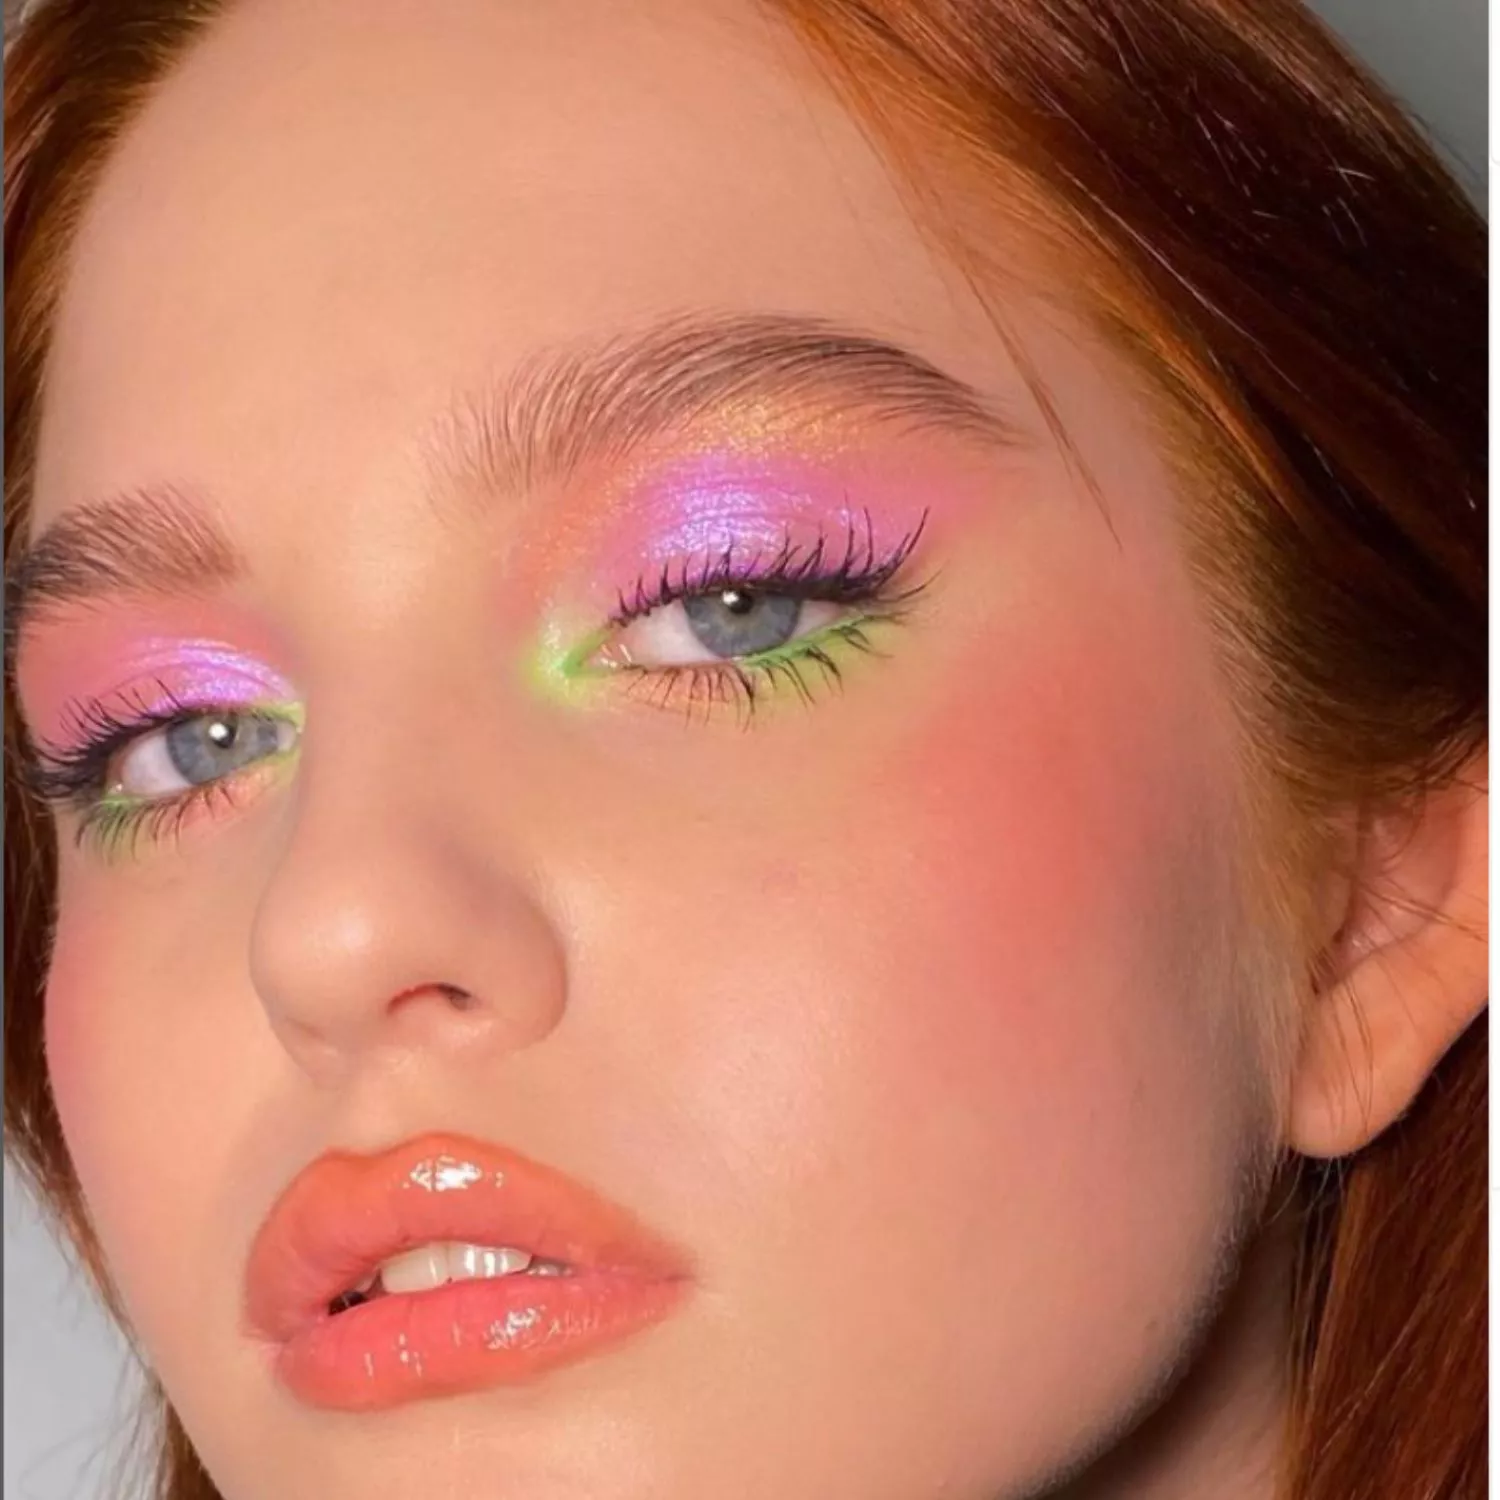 Model with pink and gold eyeshadow with neon green watercolor tear duct and lower eyelid accents